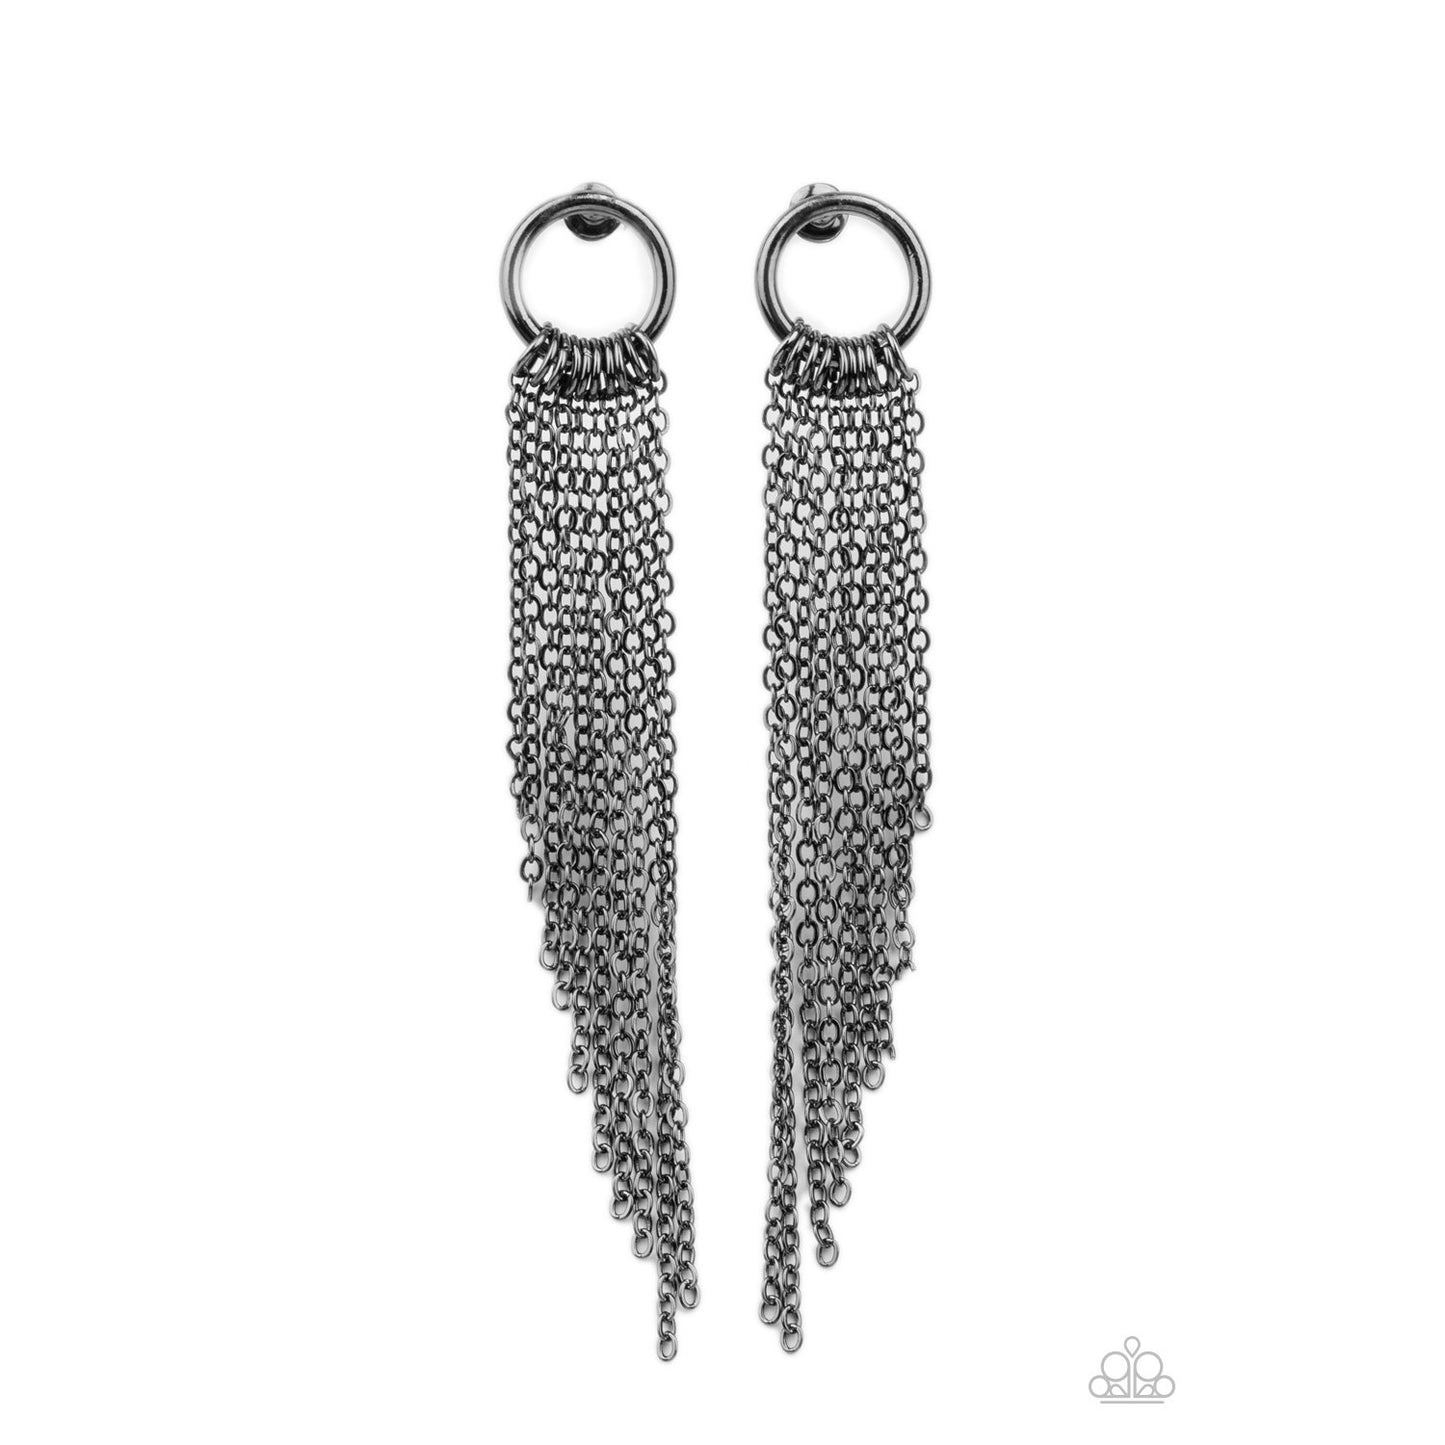 Divinely Dipping - Black Gunmetal Earrings - Paparazzi Accessories - GlaMarous Titi Jewels